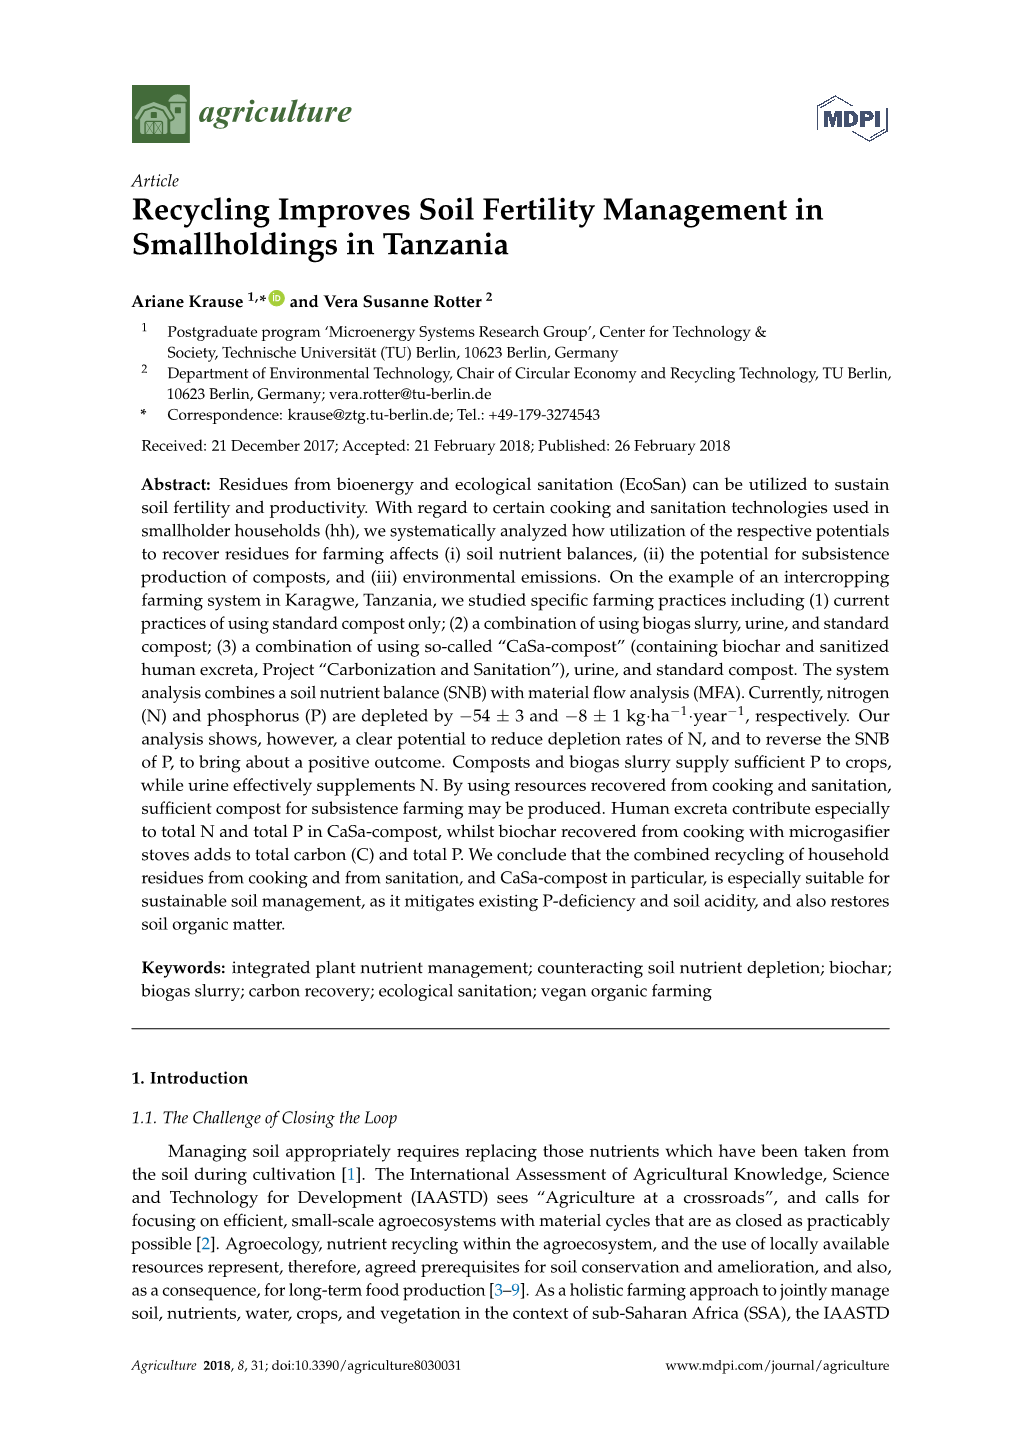 Recycling Improves Soil Fertility Management in Smallholdings in Tanzania